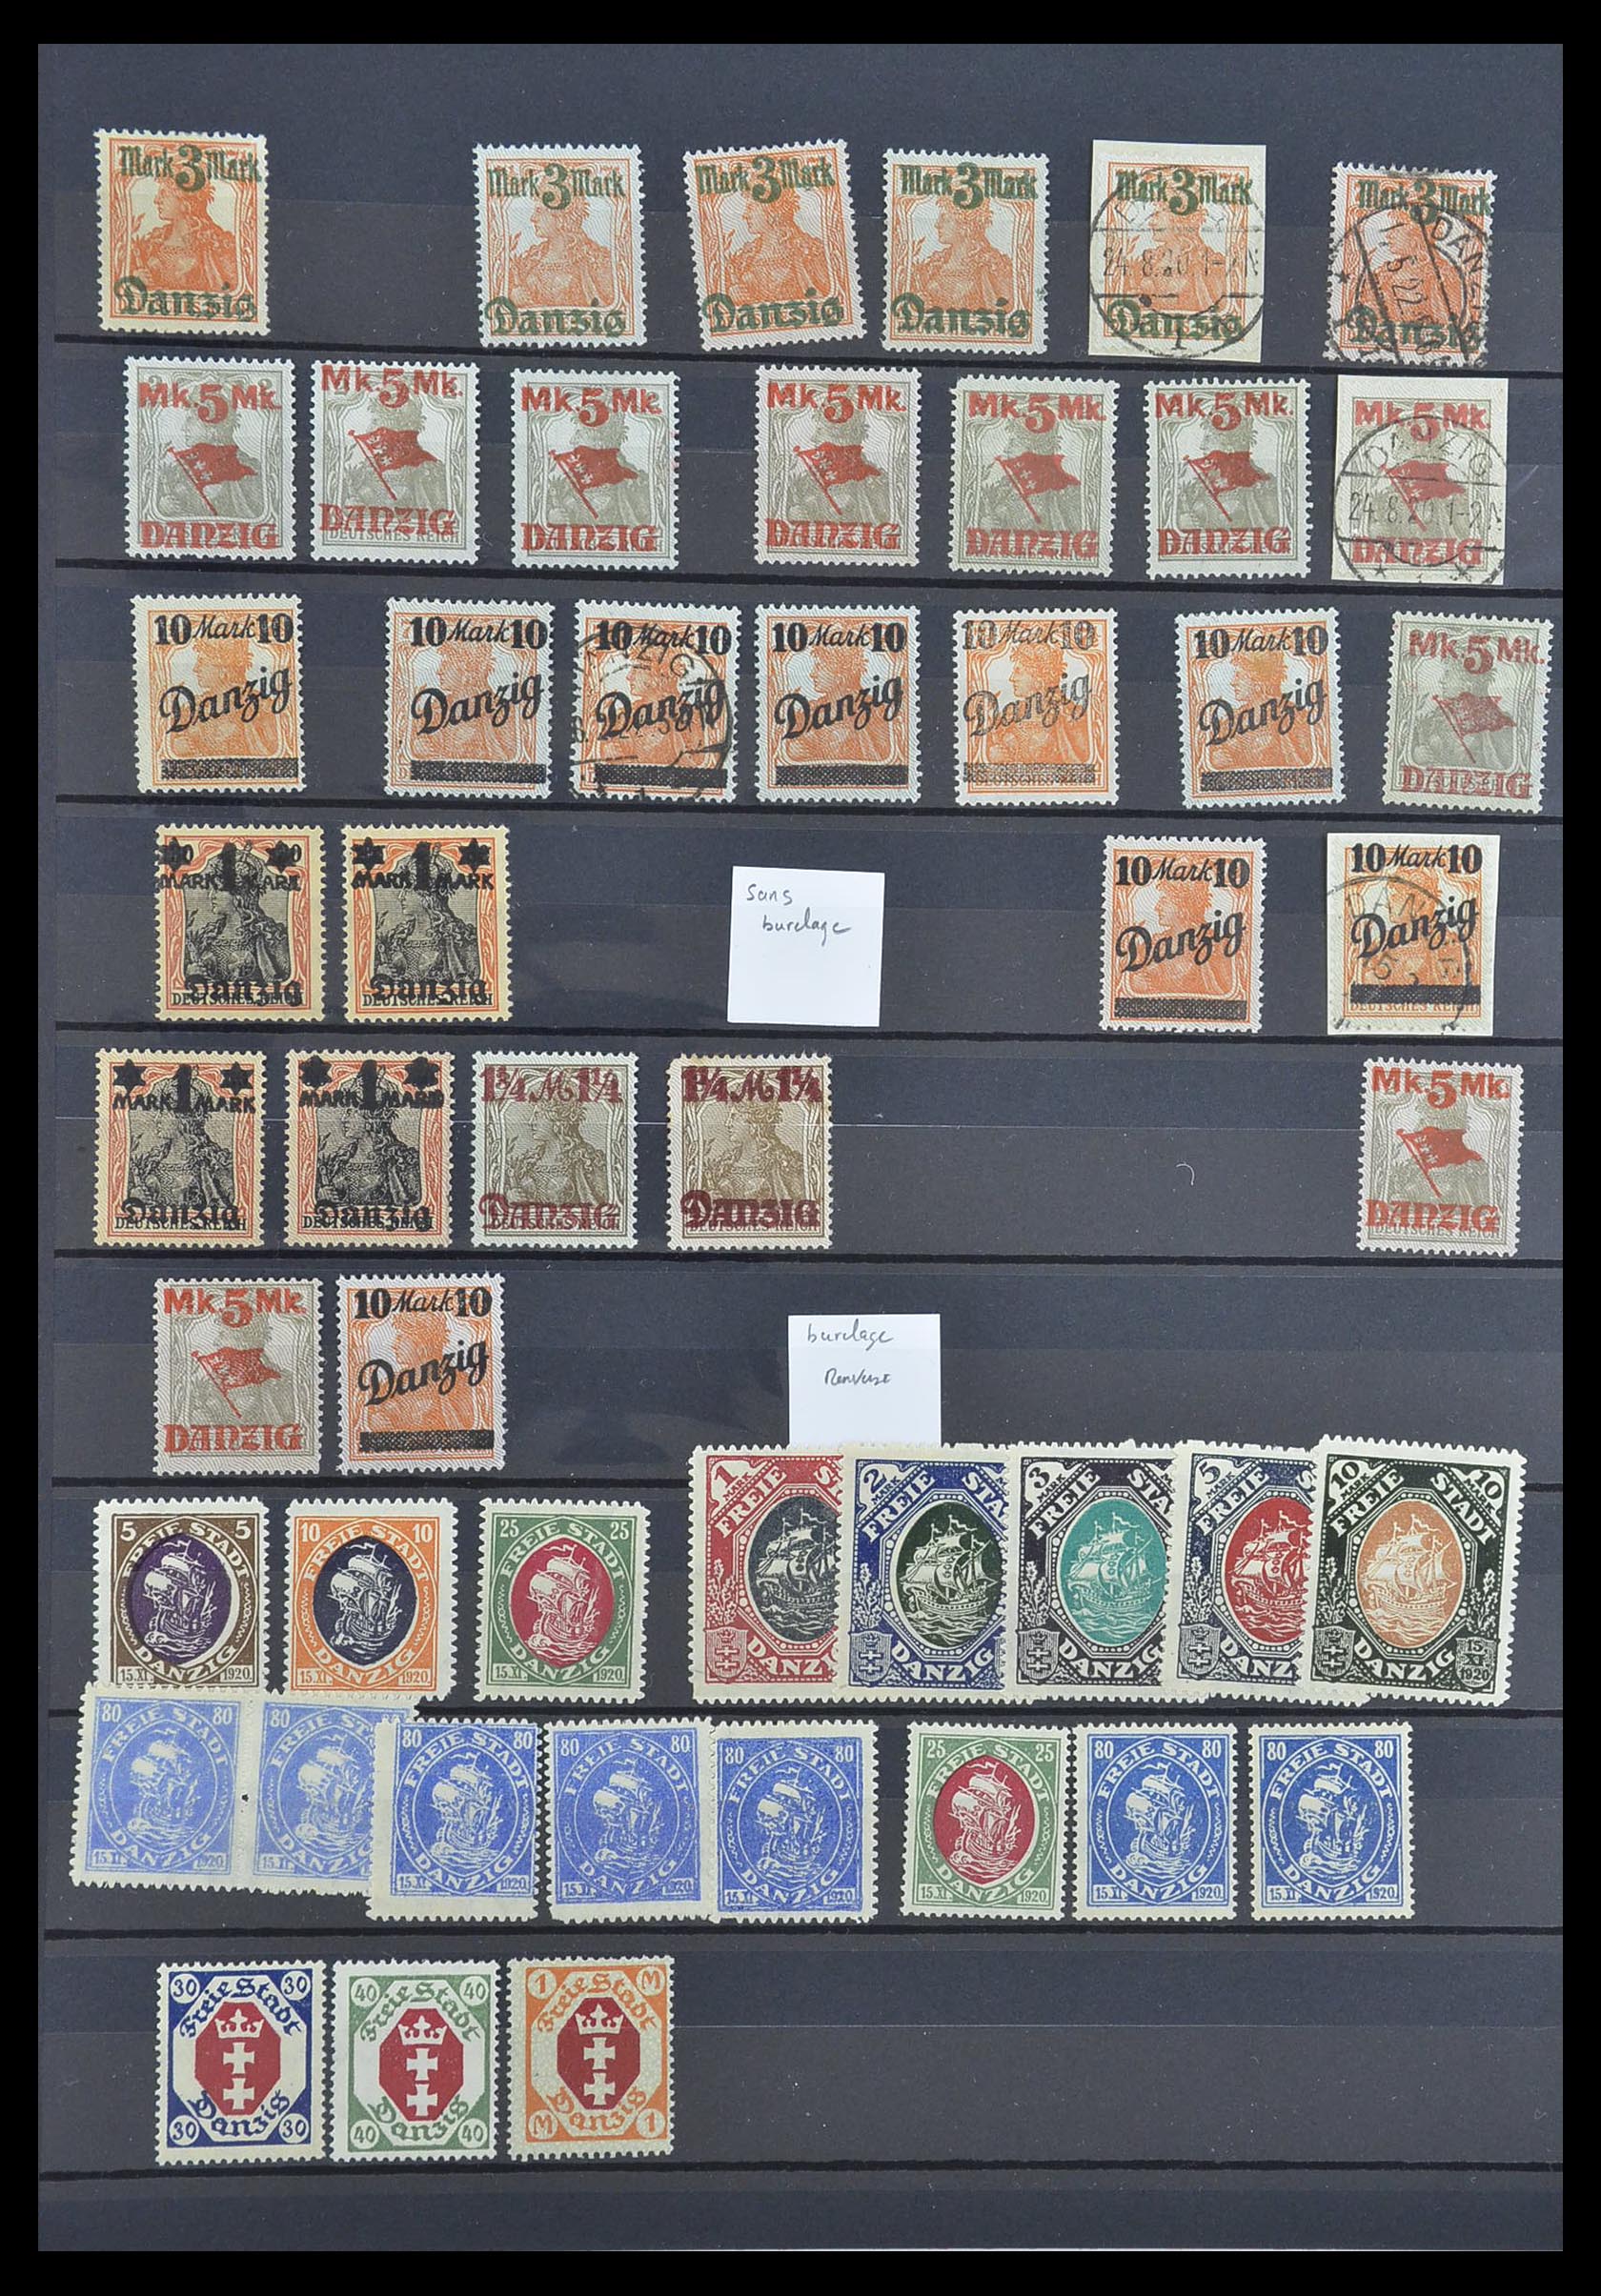 33756 085 - Stamp collection 33756 World classic 1850-1930.